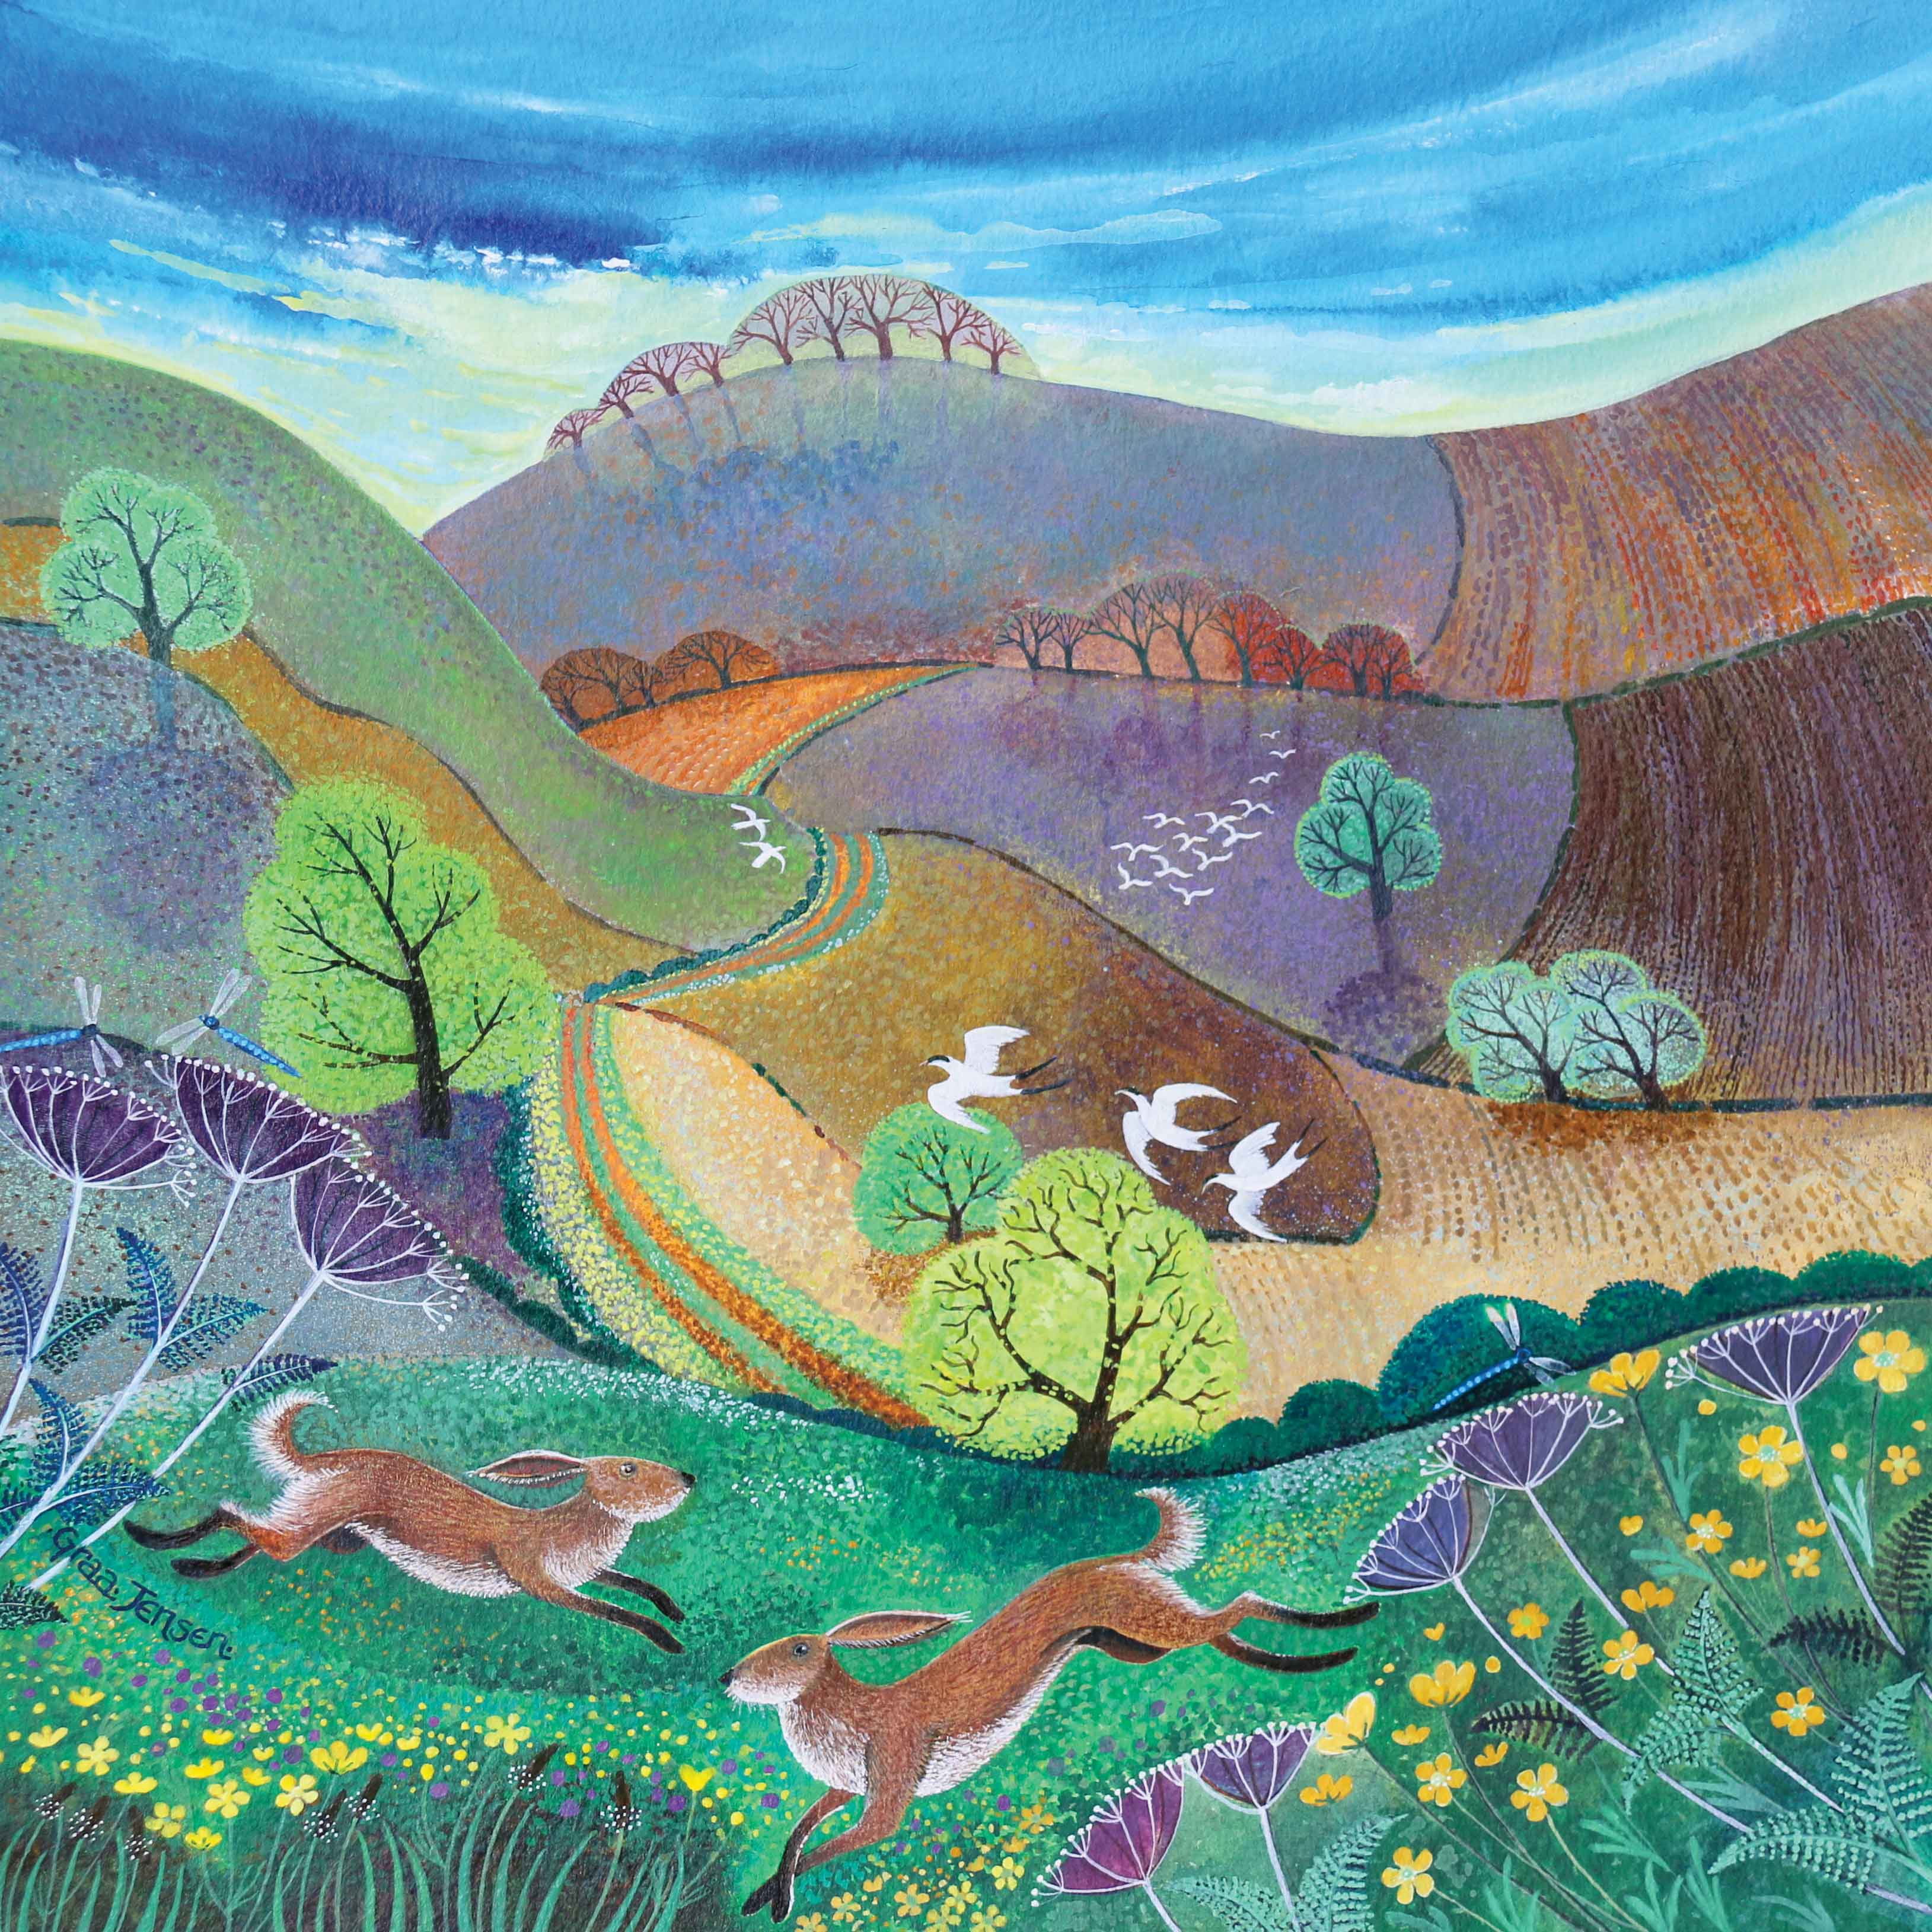 Downland Hares by Lisa Graa Jensen, Fine Art Greeting Card, Acrylic inks, Two hares in field